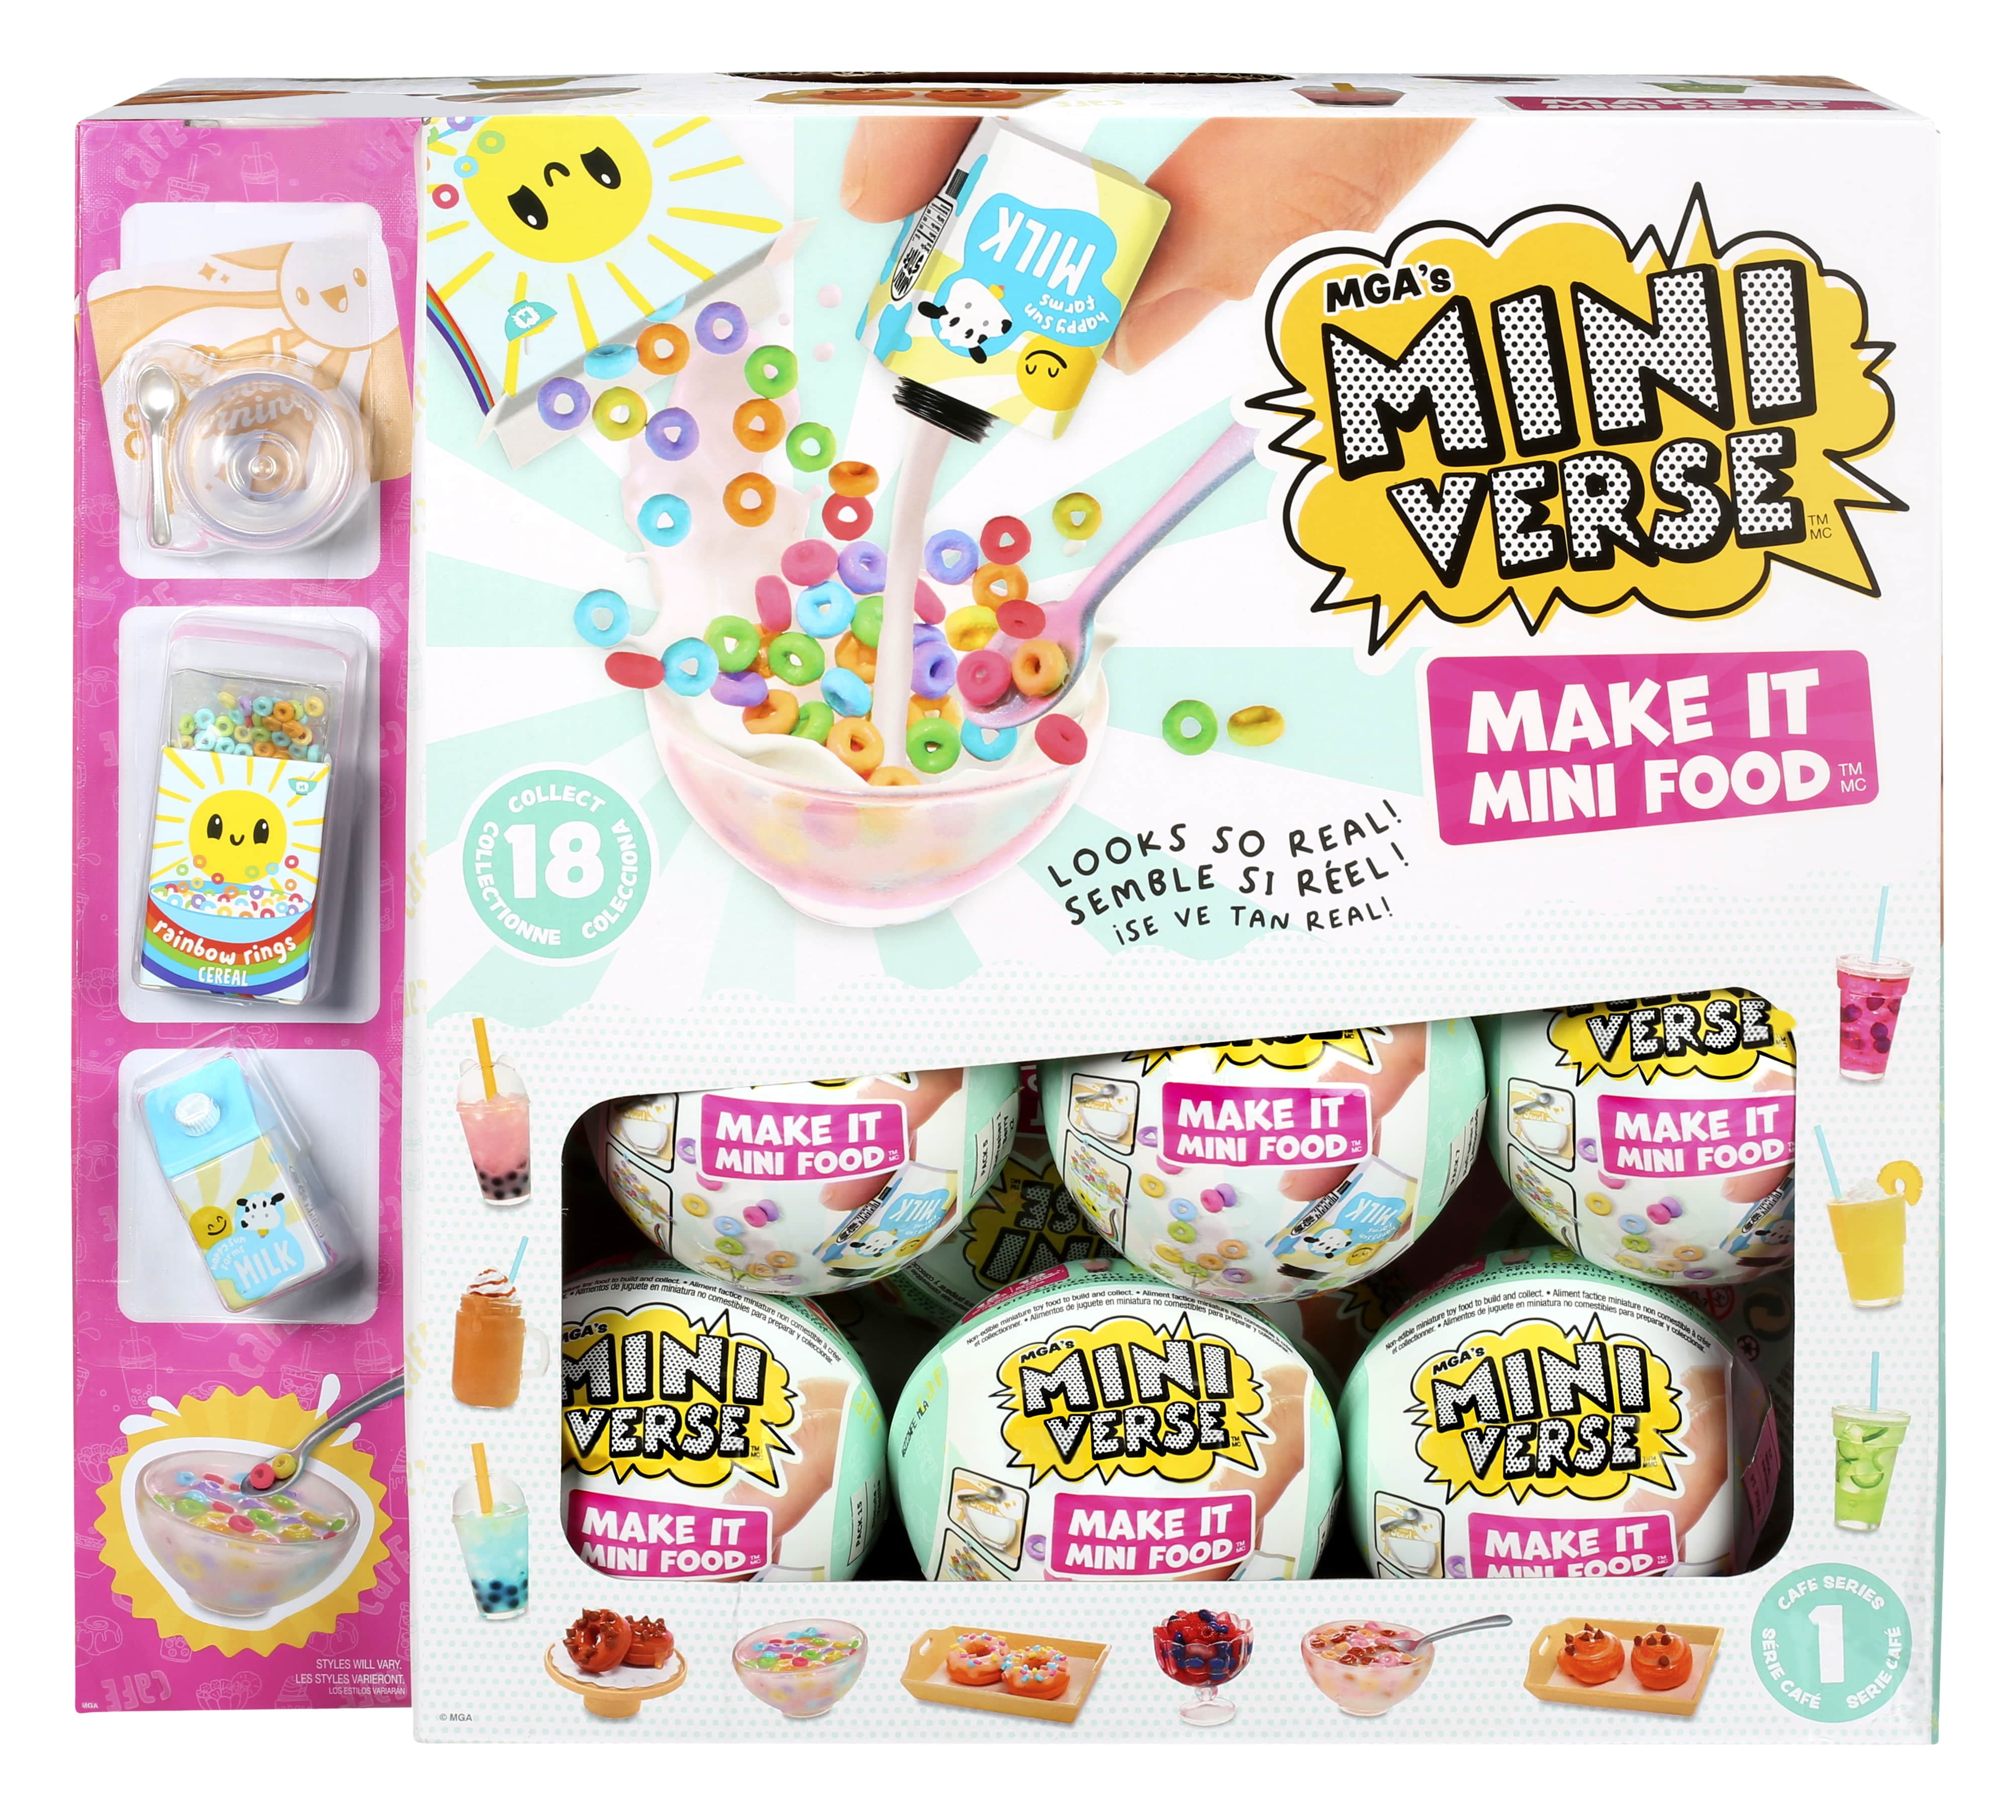 MGA's Miniverse Make It Mini Food Cafe Series 1 Minis - Complete Collection  24 Packages, Blind Packaging, Stocking Stuffers, DIY, Resin Play